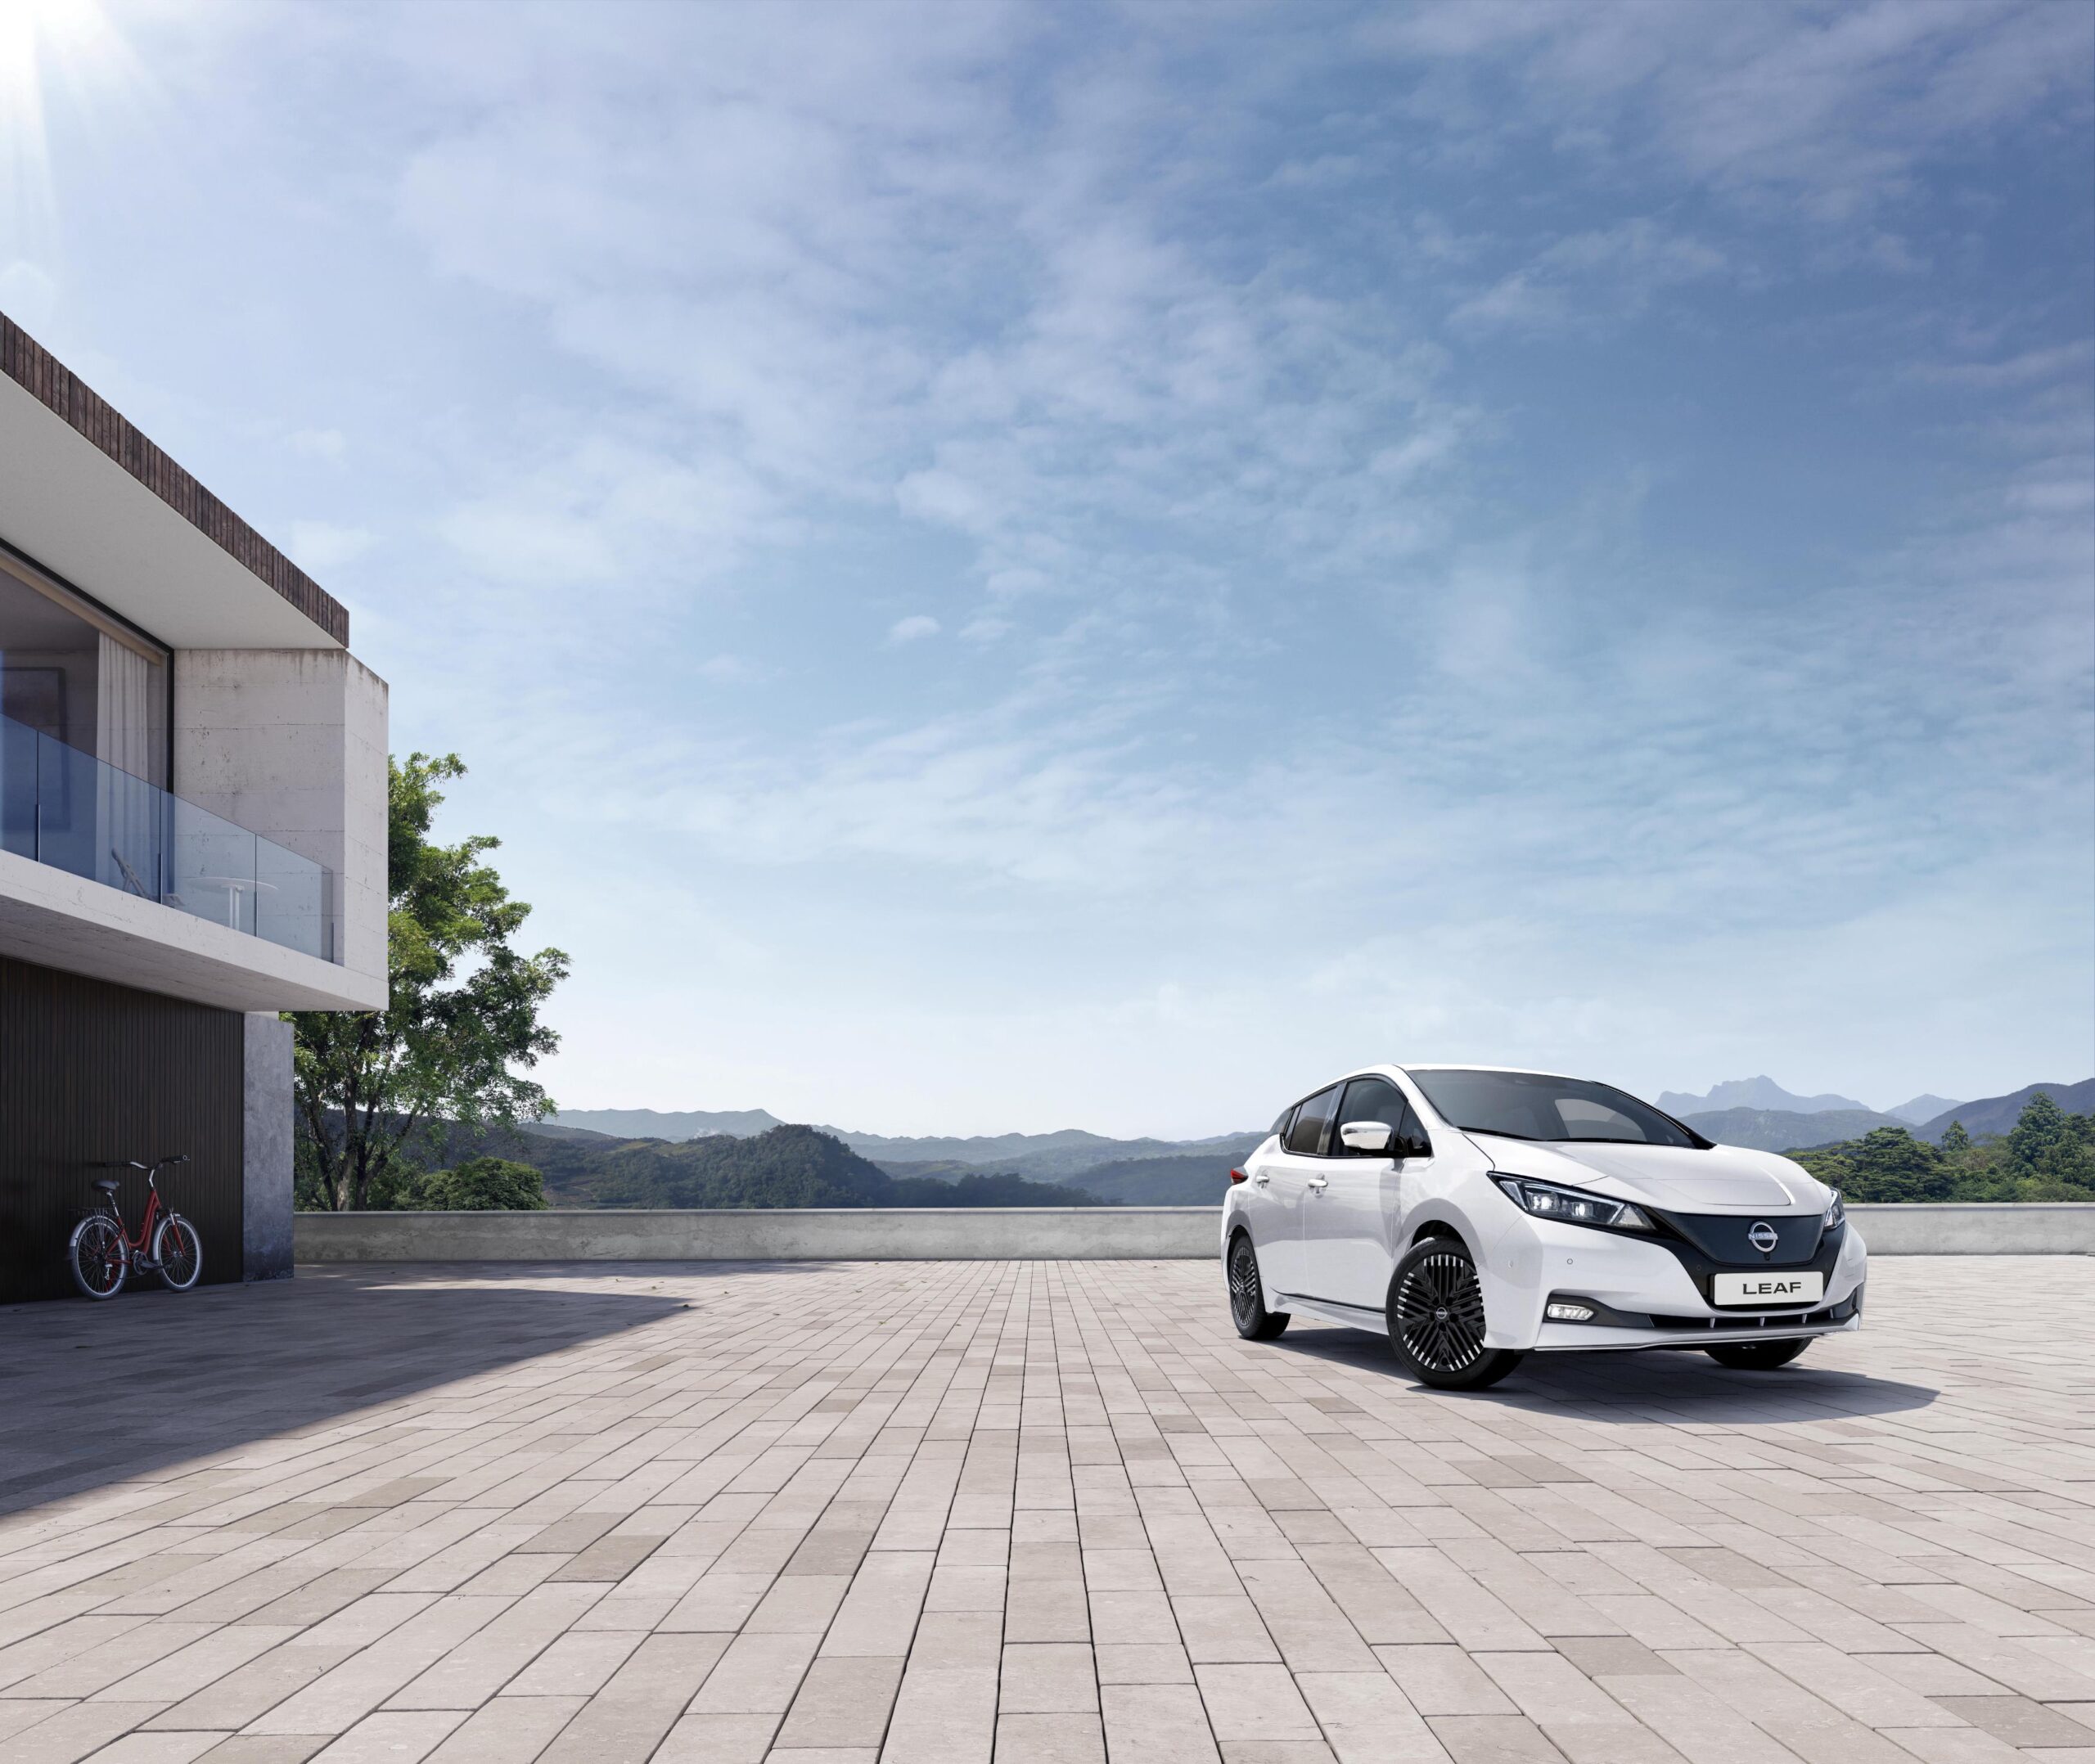 New Nissan LEAF Shiro with starting price of £28,495